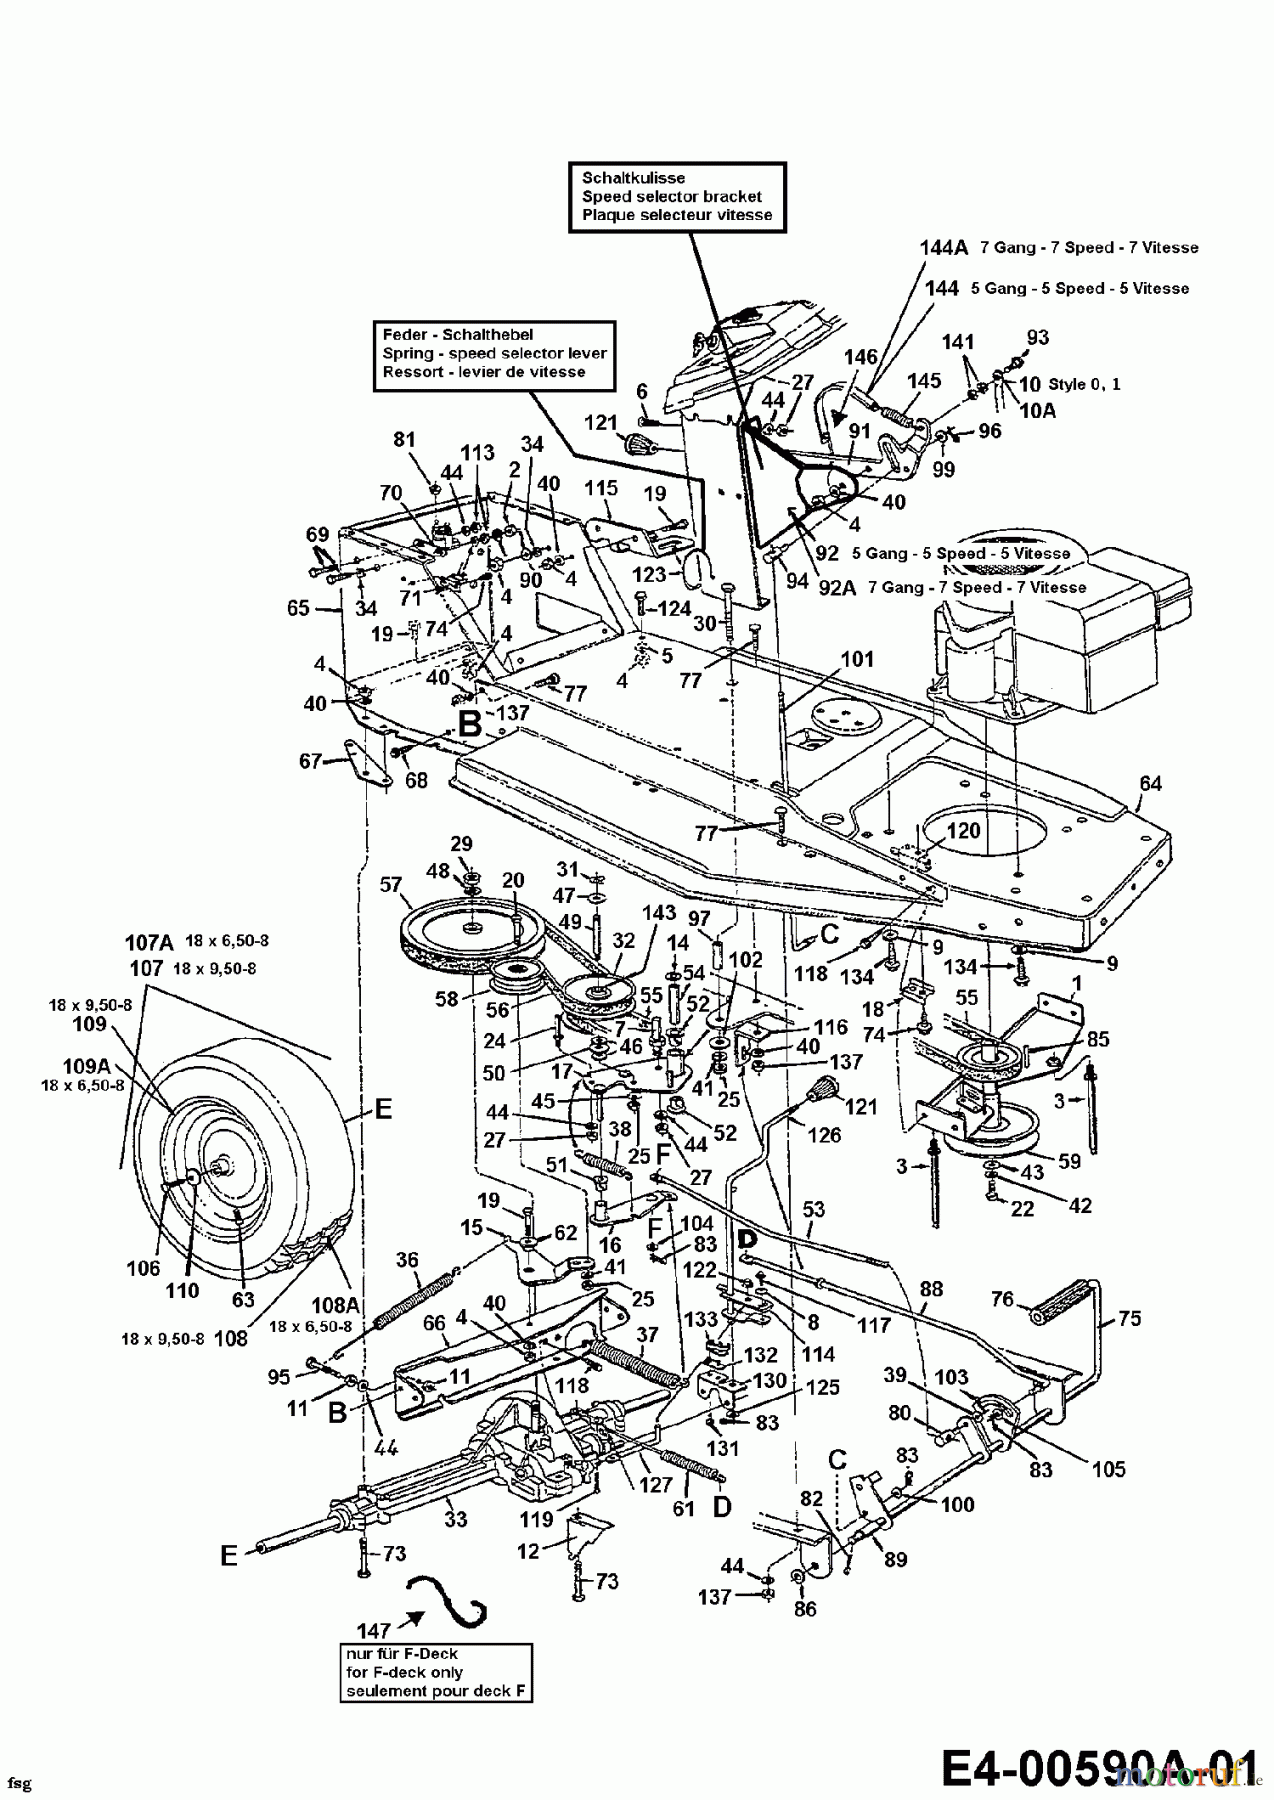  Central Park Lawn tractors CPA-11/81 13AC451D641  (1998) Drive system, Engine pulley, Pedal, Rear wheels